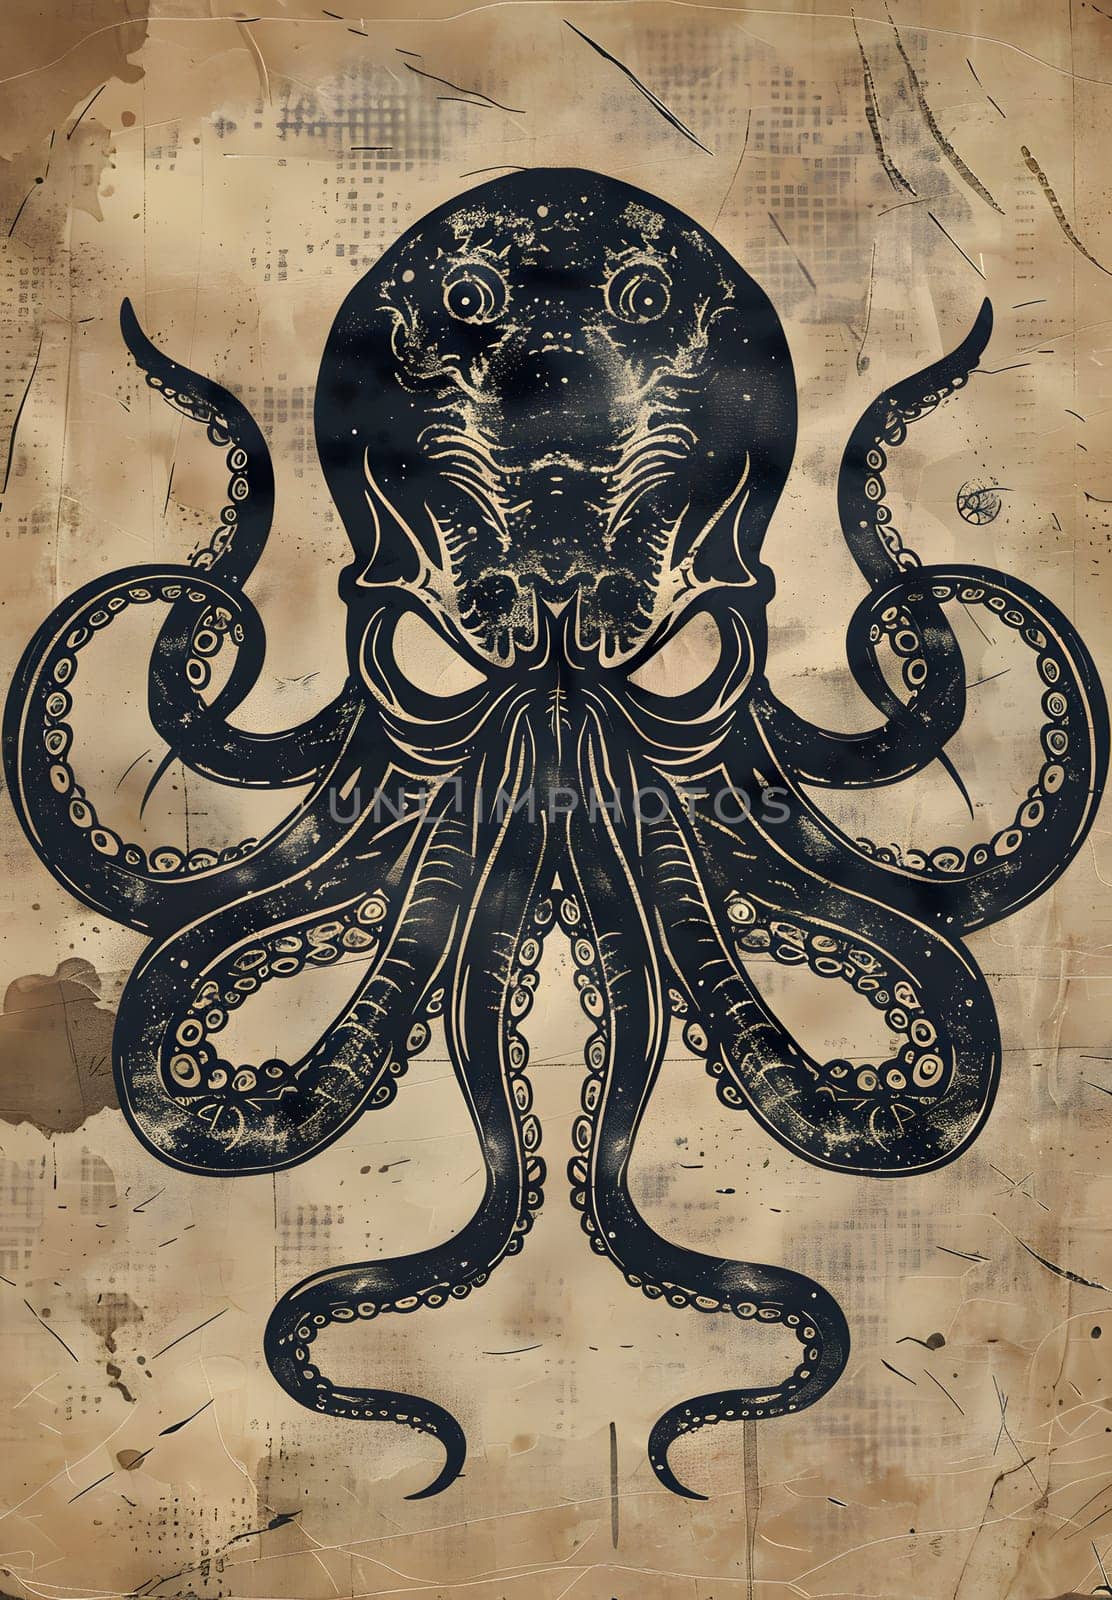 A monochromatic illustration of a marine invertebrate, the octopus, displayed on a brown background. The cephalopods symmetric pattern is depicted in an artistic black and white painting